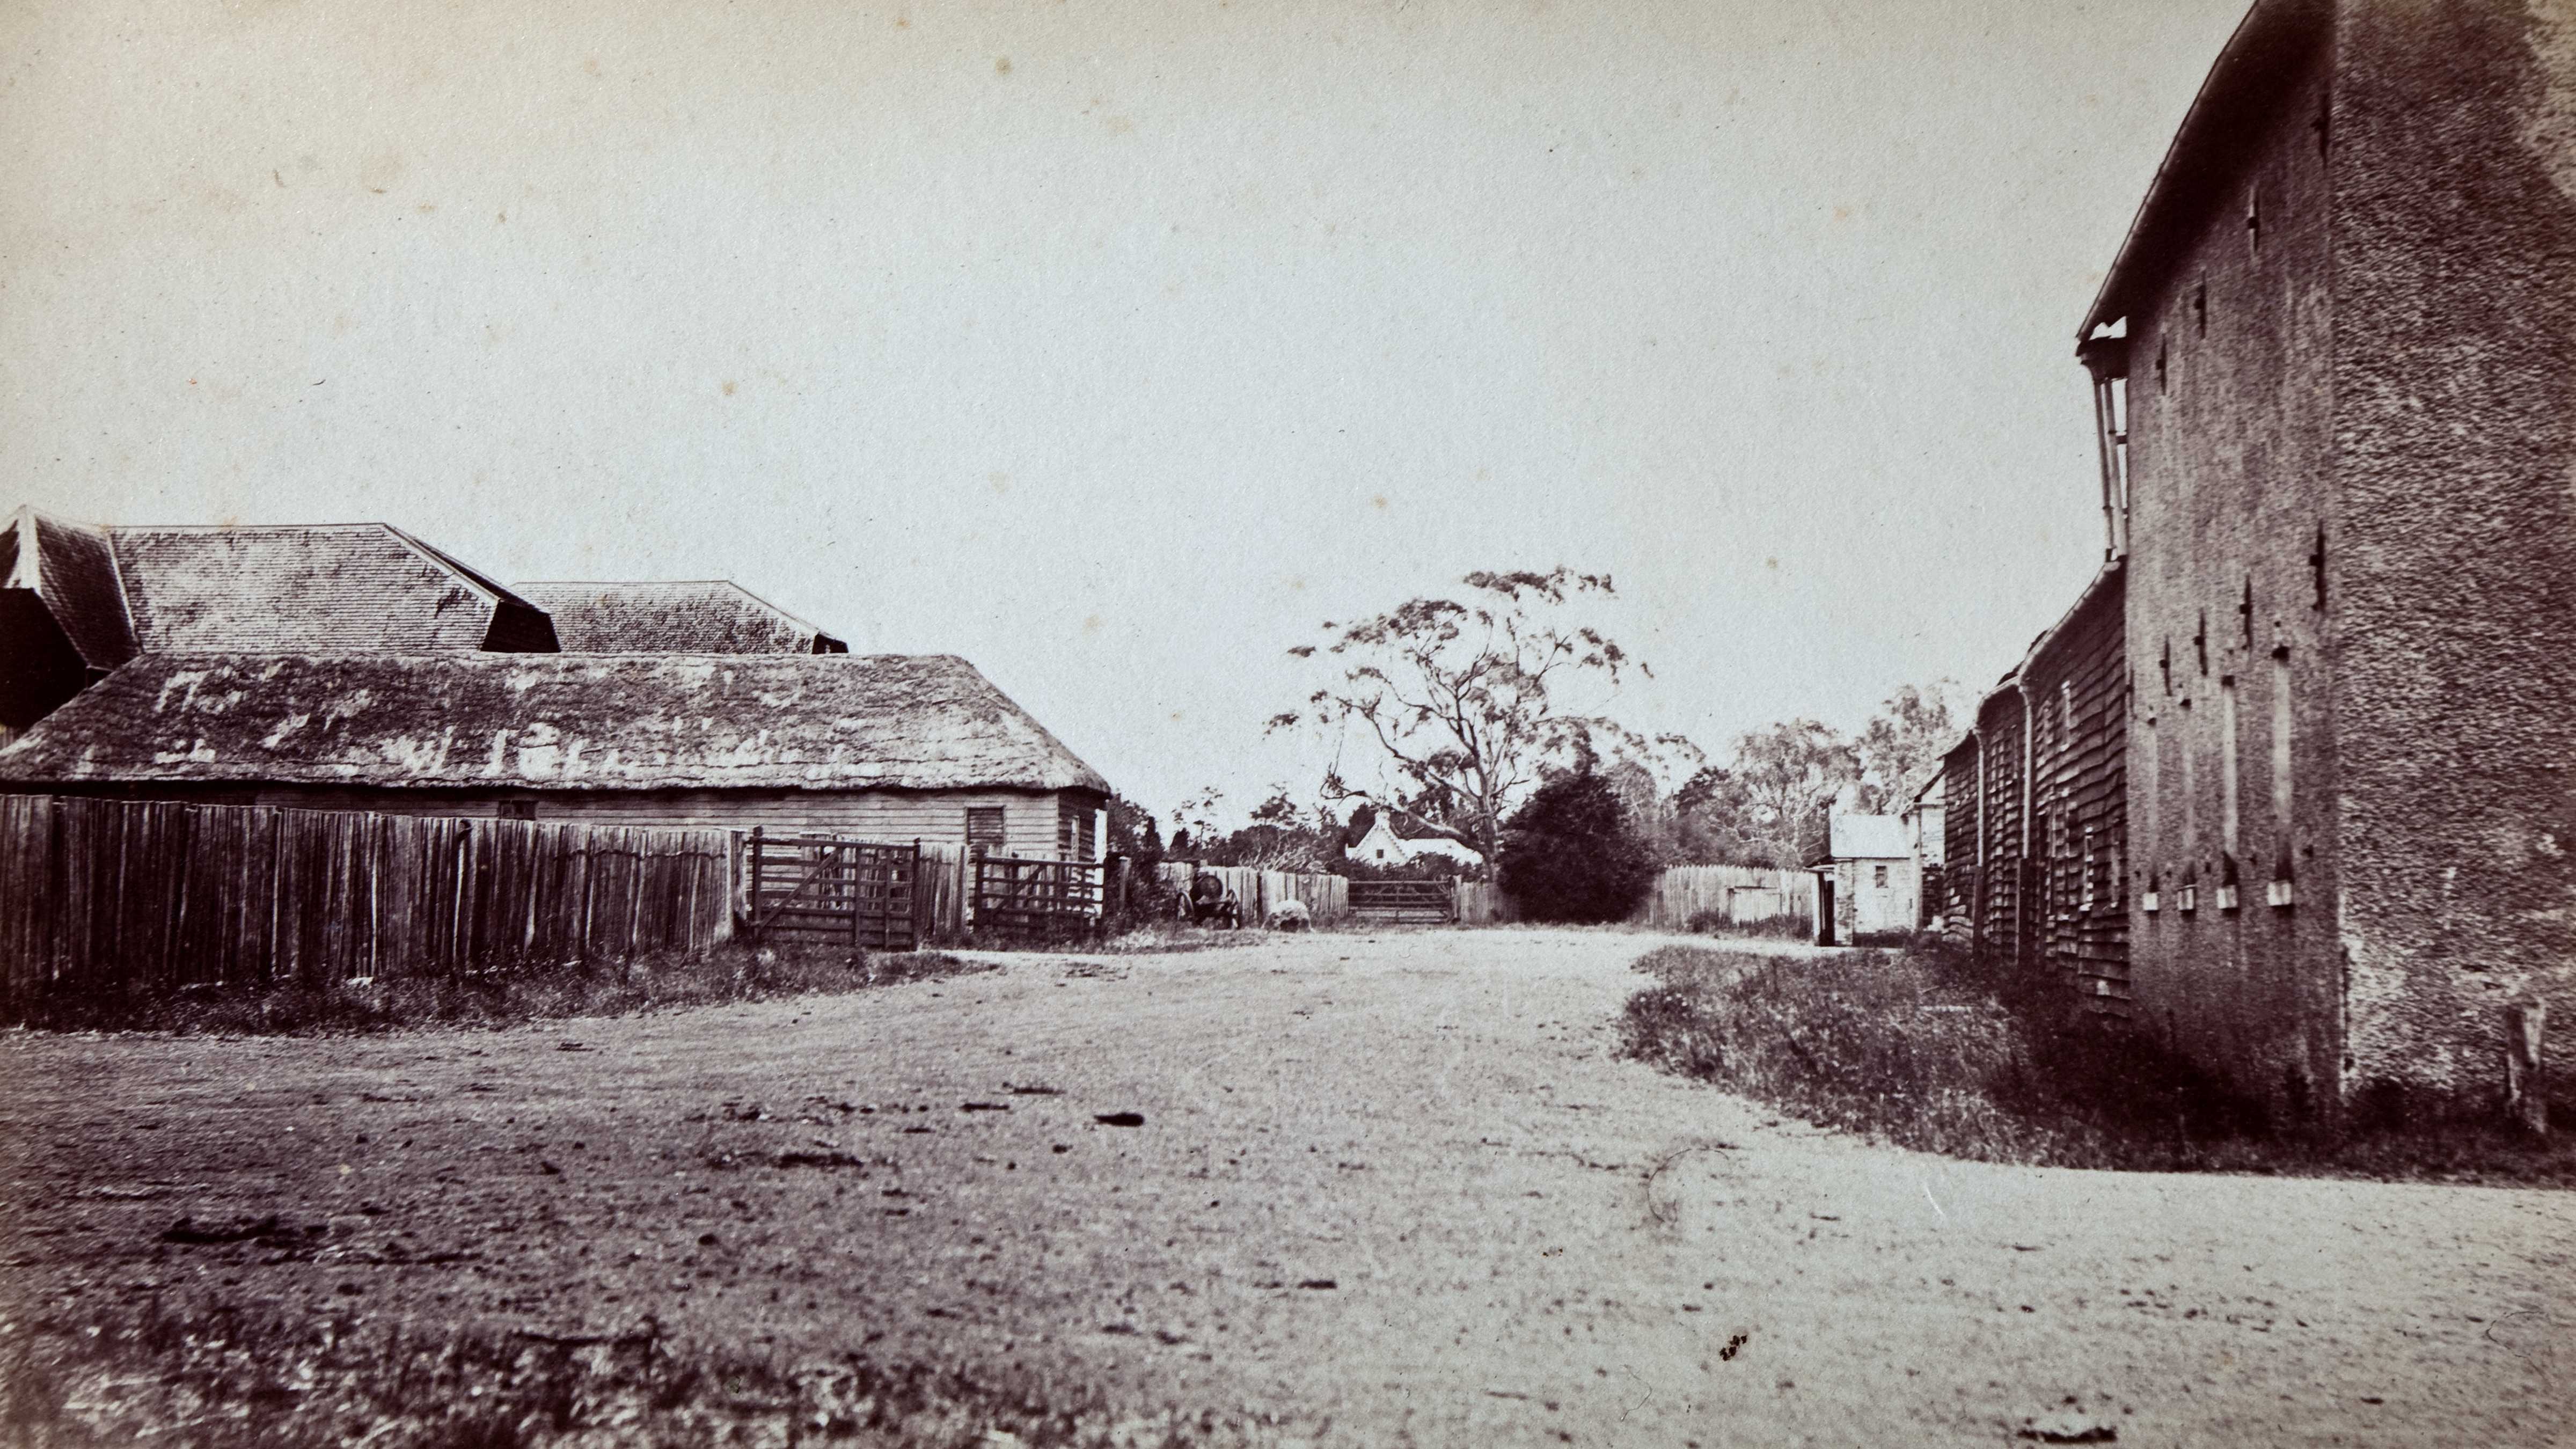 Black and white image of the Brickendon Farm Village road lined with buildings. On the right is the brick granary, shearing shed, draught horse stables and overseers cottage while on the left is a long vertical paling fence, stables, workshop and roofs of the timber barns.  A young pine tree stands at the end of the road. Source: Brickendon collection.